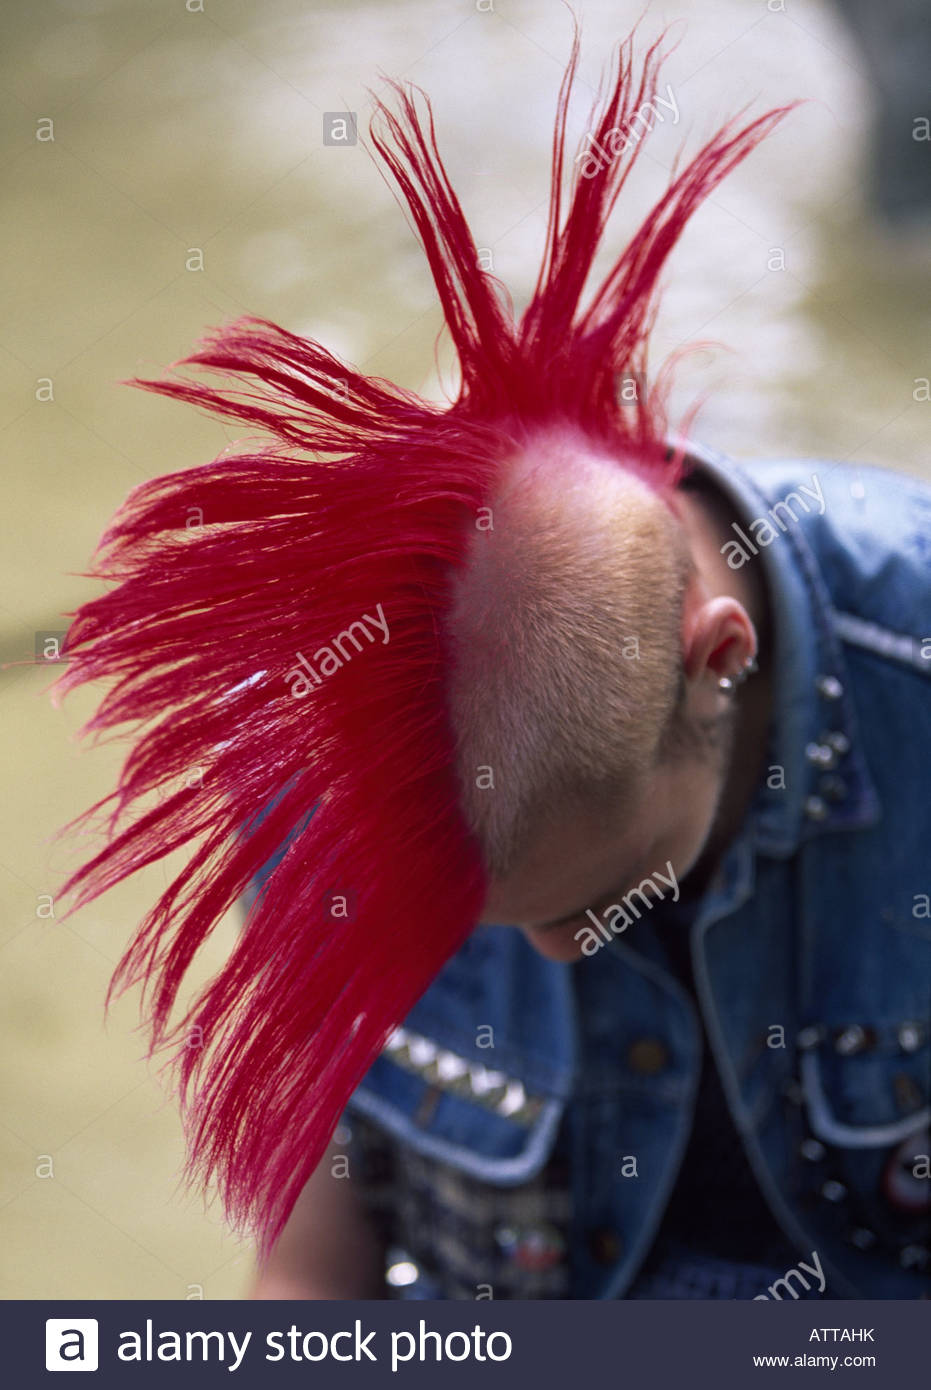 Male punk with red mohican hairstyle Stock Photo: 16386030 